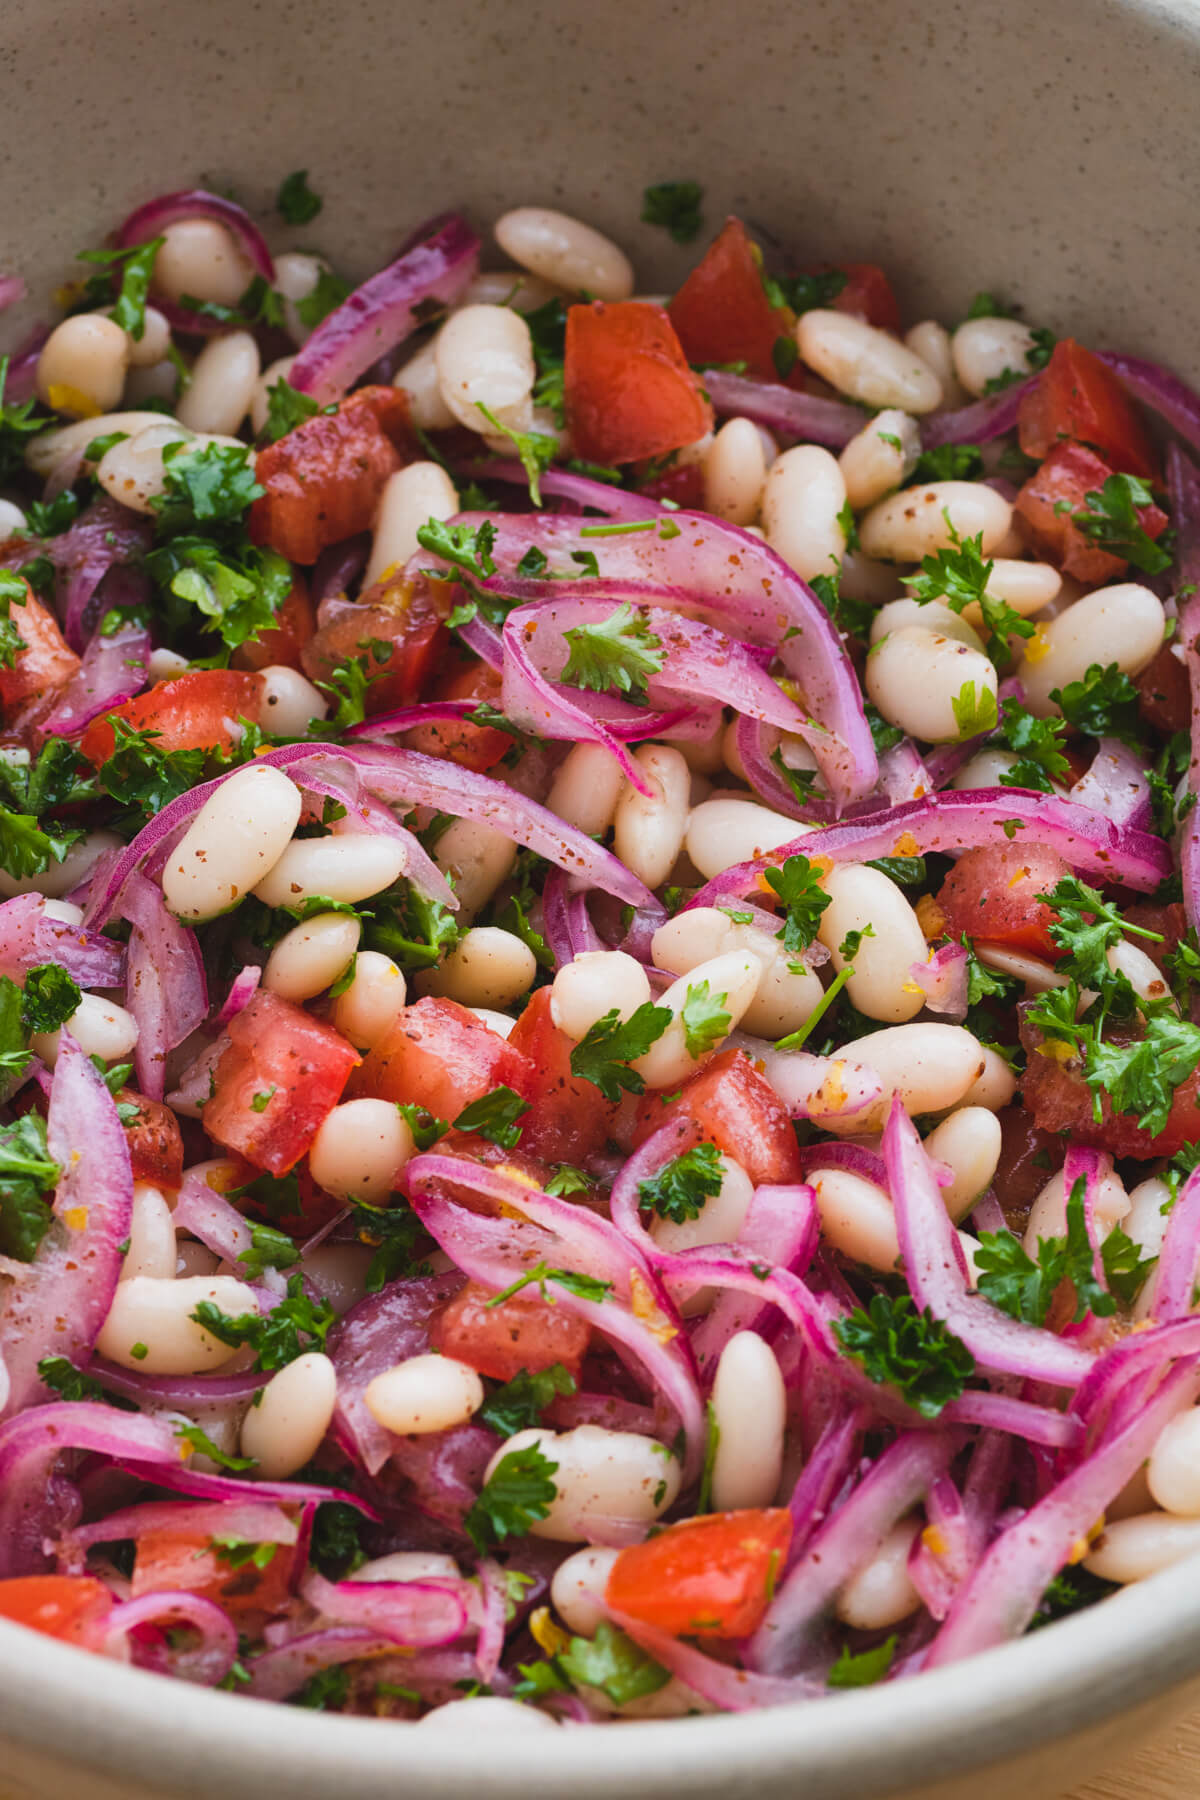 A bowl full of colourful white bean salad with red onions, tomatoes, and green curly parsley.